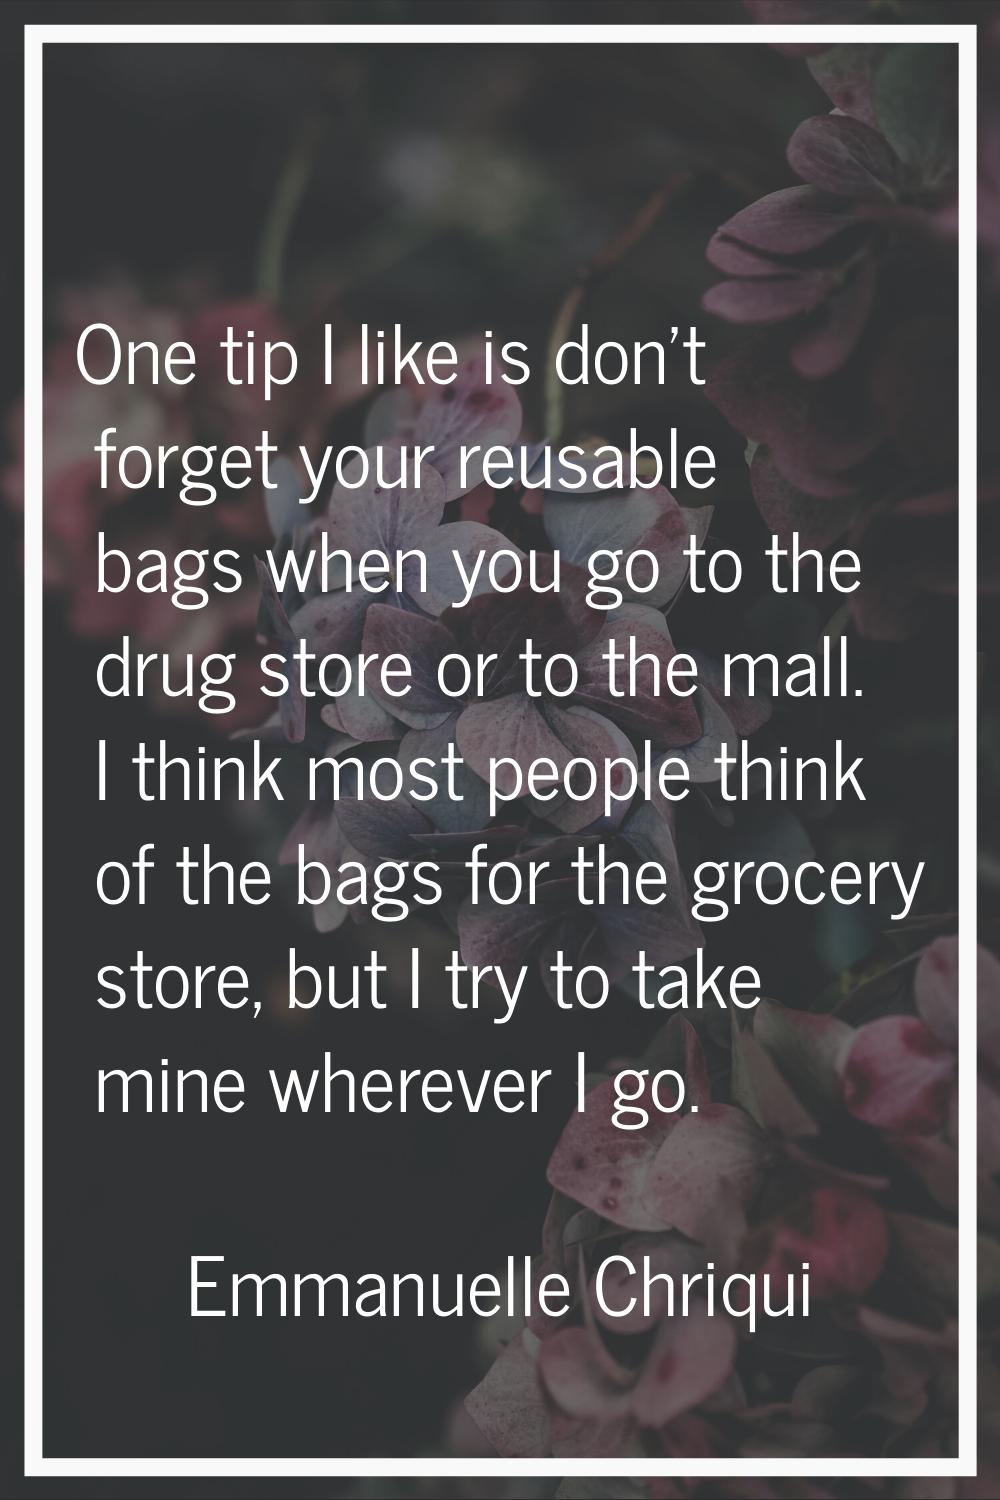 One tip I like is don't forget your reusable bags when you go to the drug store or to the mall. I t